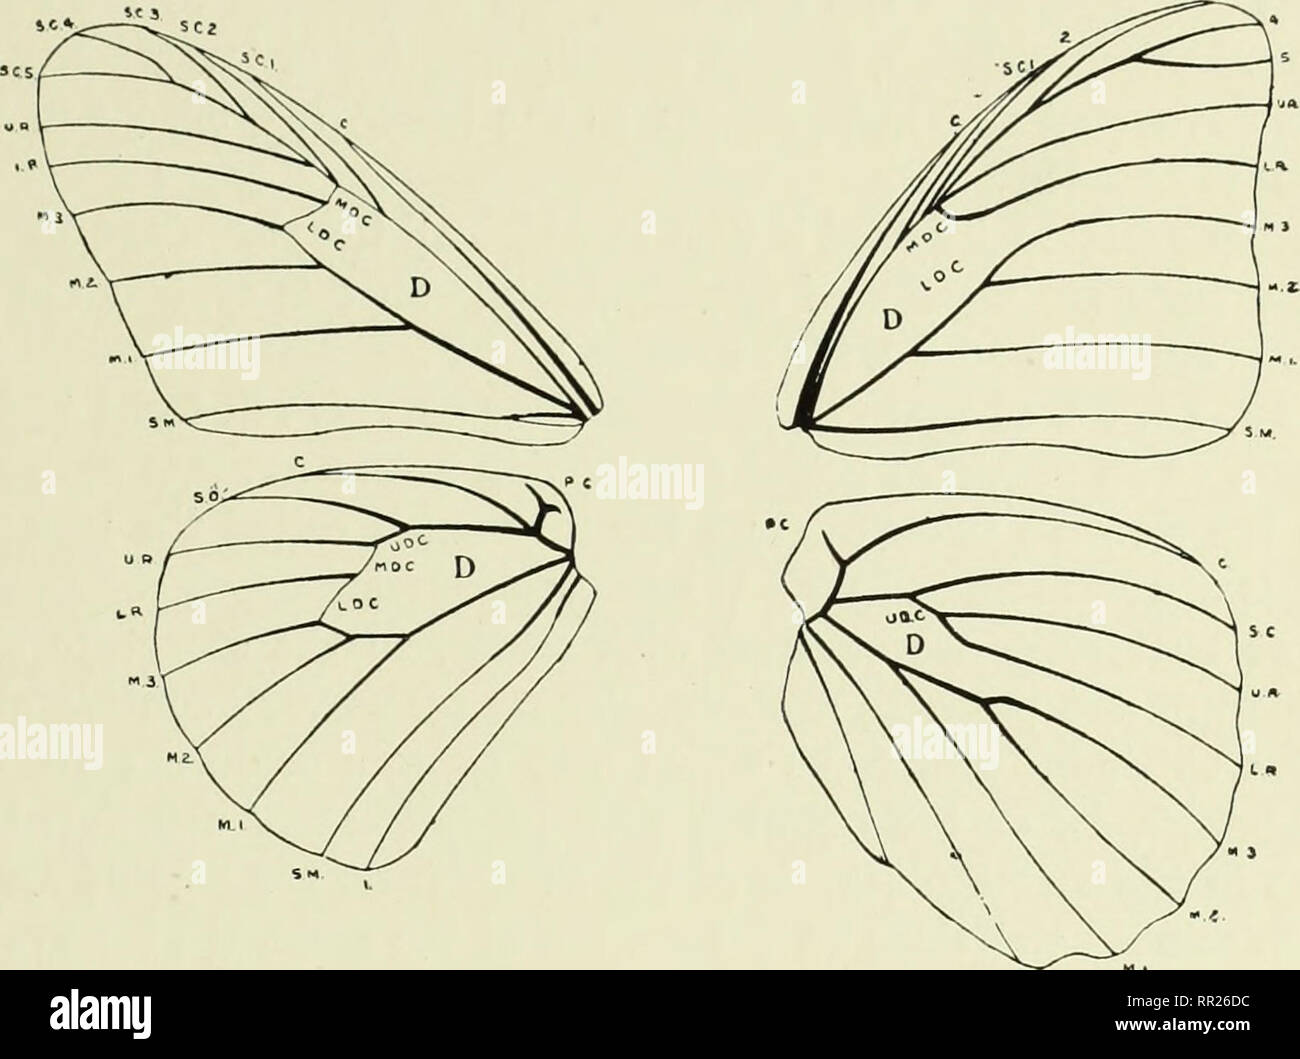 . African mimetic butterflies : being descriptions and illustrations of the principal known instances of mimetic resemblance in the Rhopalocera of the Ethiopian Region, together with an explanation of the Miullerian and Batesian theories of mimicry, and some account of the evidences on which these theories are based. Butterflies; Mimicry (Biology). INTRODUCTION 9 In the fore-wing the first nervure is a stout rib emanating from the base of the wing and extending some distance along the costa. This is the costal nervure and is without branches. Beneath this, and in close proximity, arises the su Stock Photo